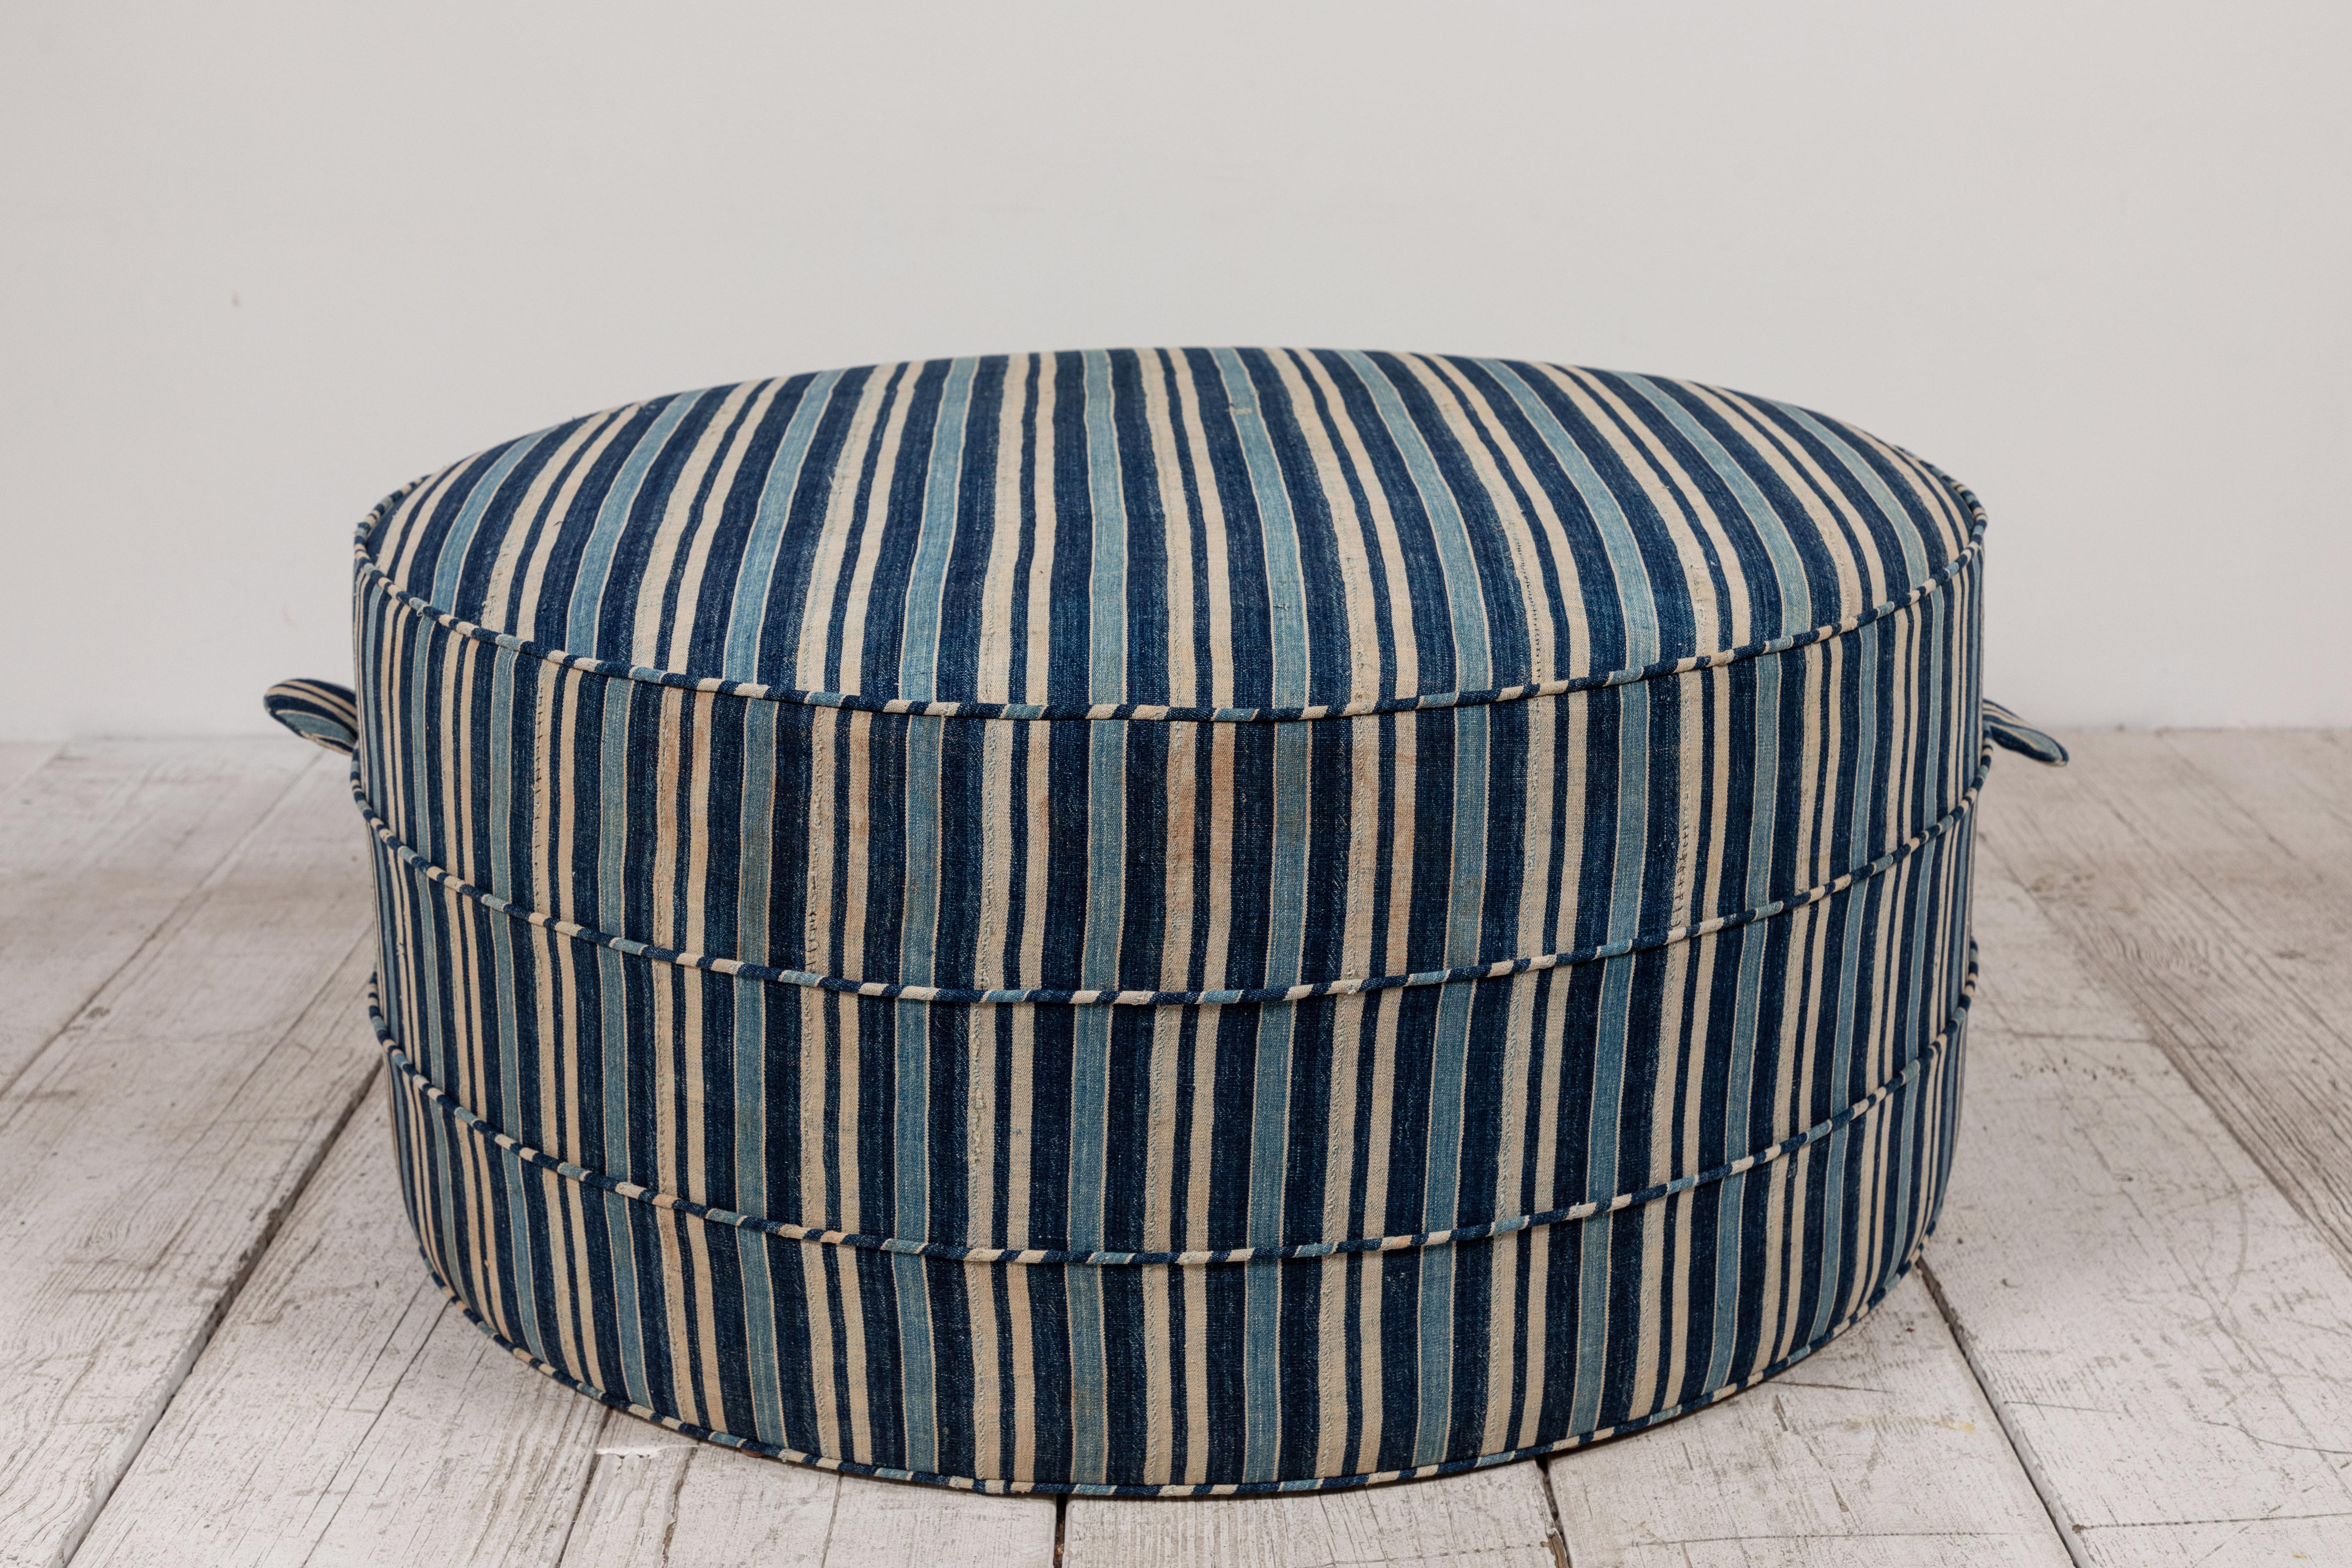 Solid wood frame and upholstered hassock with two ring piping and double handle details offers versatility in accent seating. This specific hassock is upholstered in a one of a kind Striped Indigo textile from Burkino Faso.